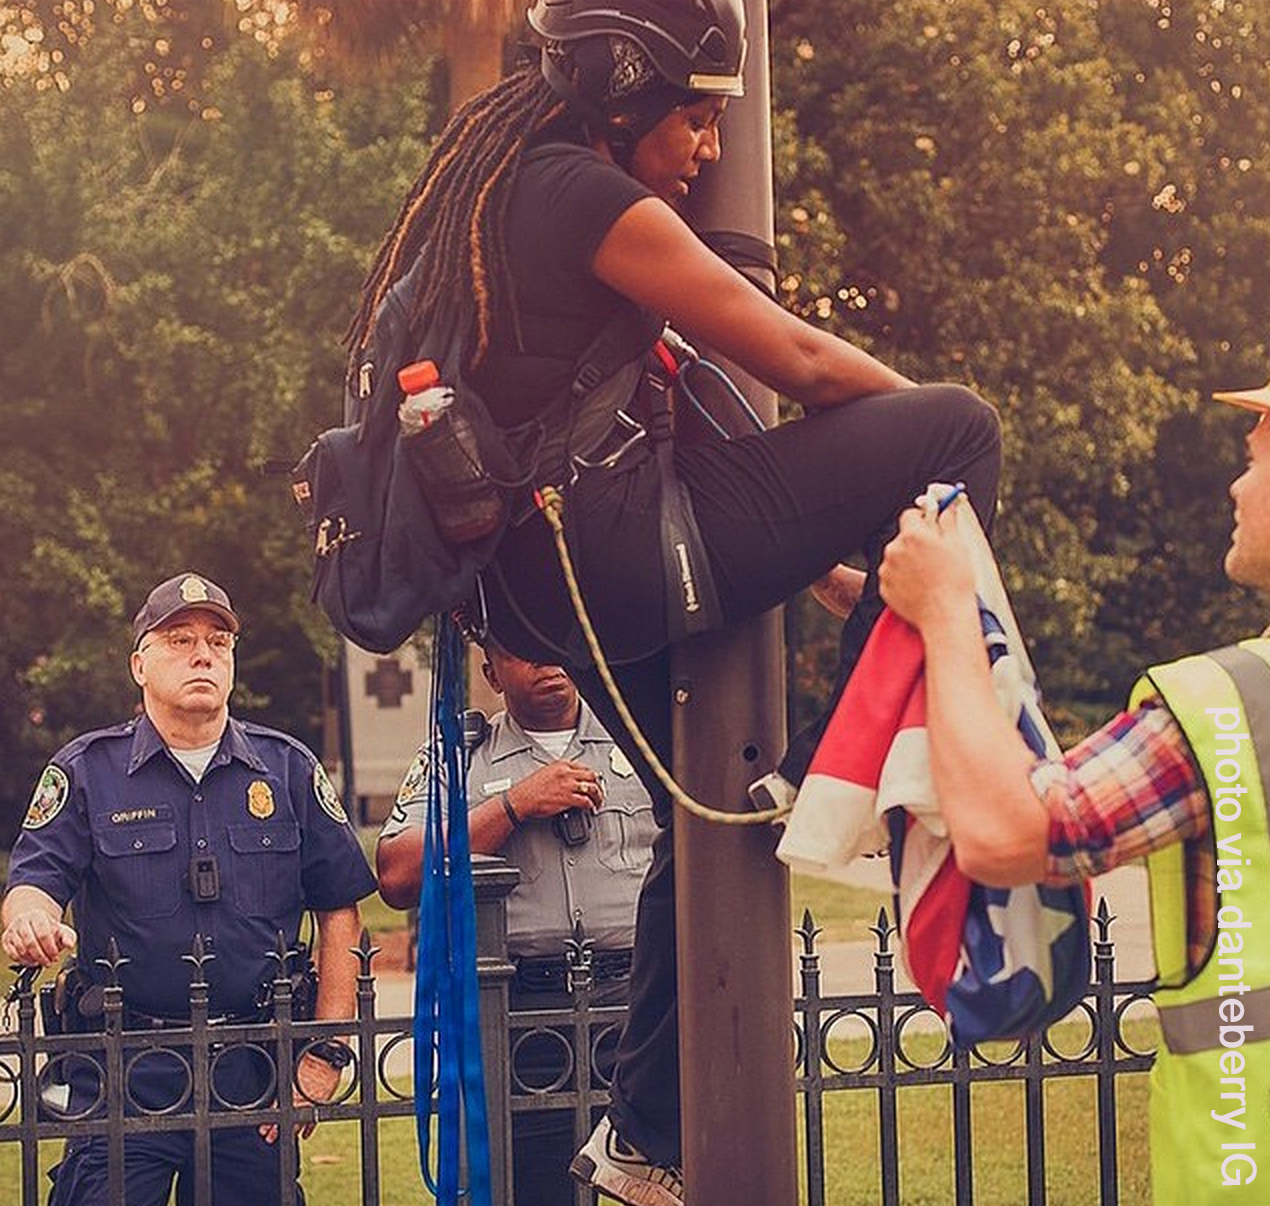 Bree Newsome takes down the Confederate Battle Flag at the South Carolina